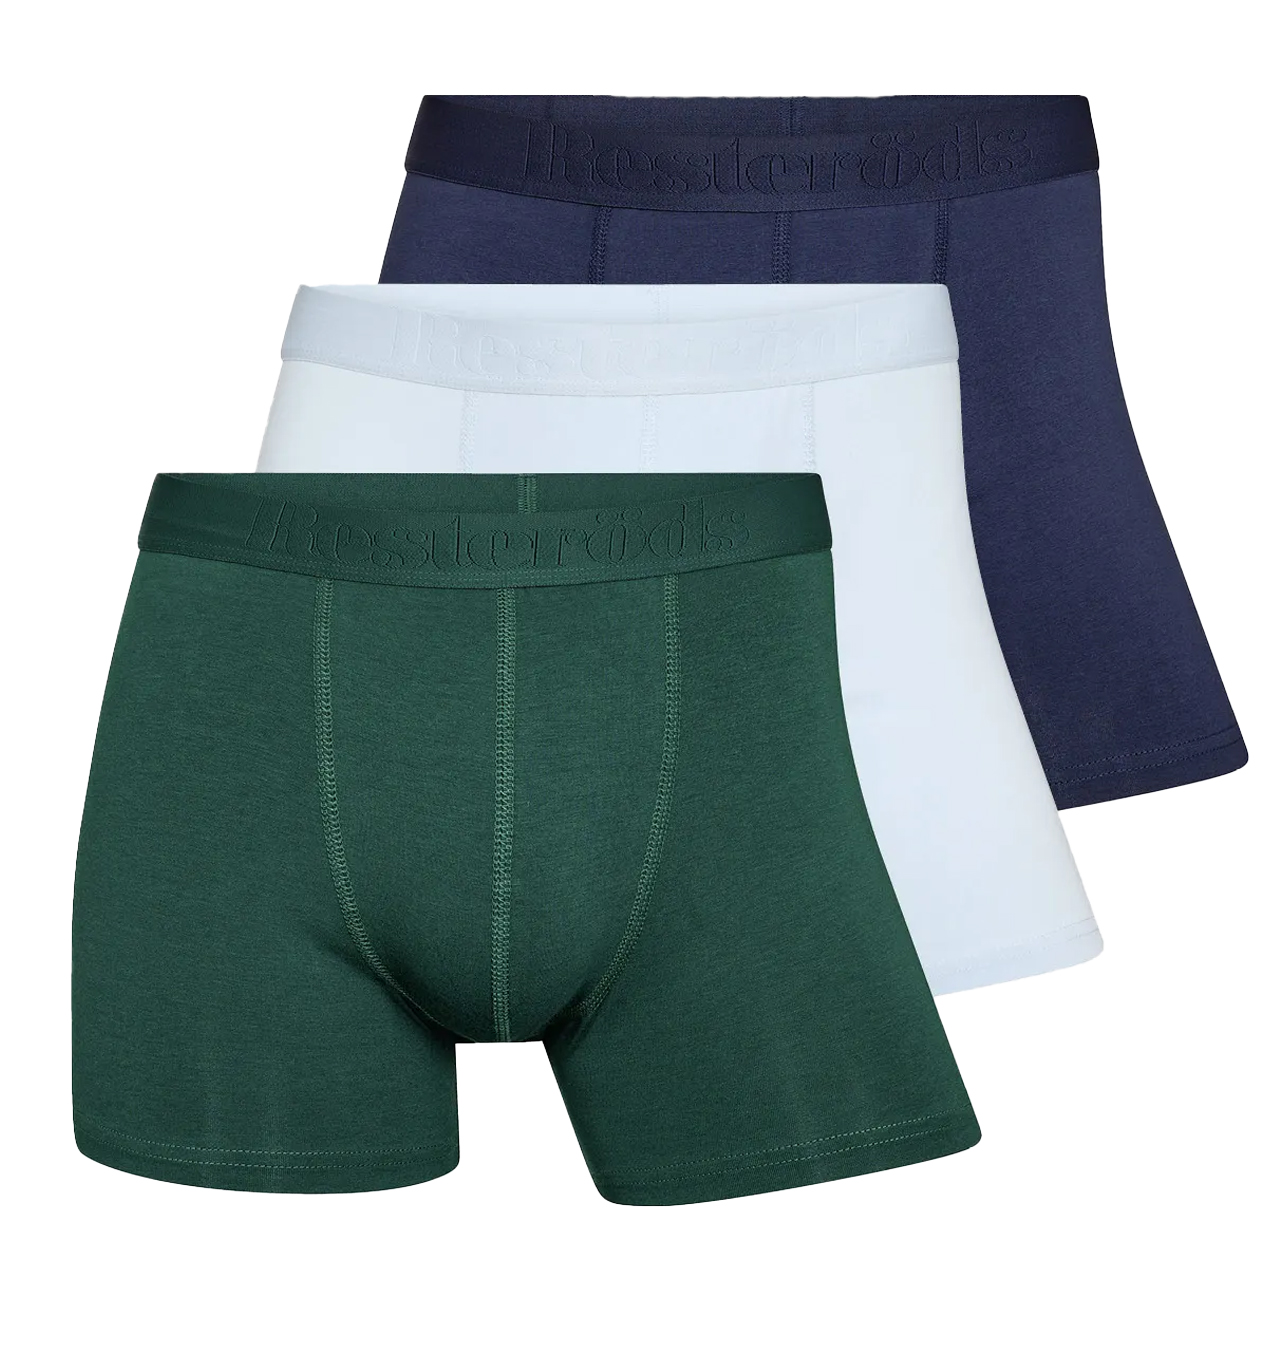 Resterods---Boxer-Bamboo-3-Pack---Multi-35